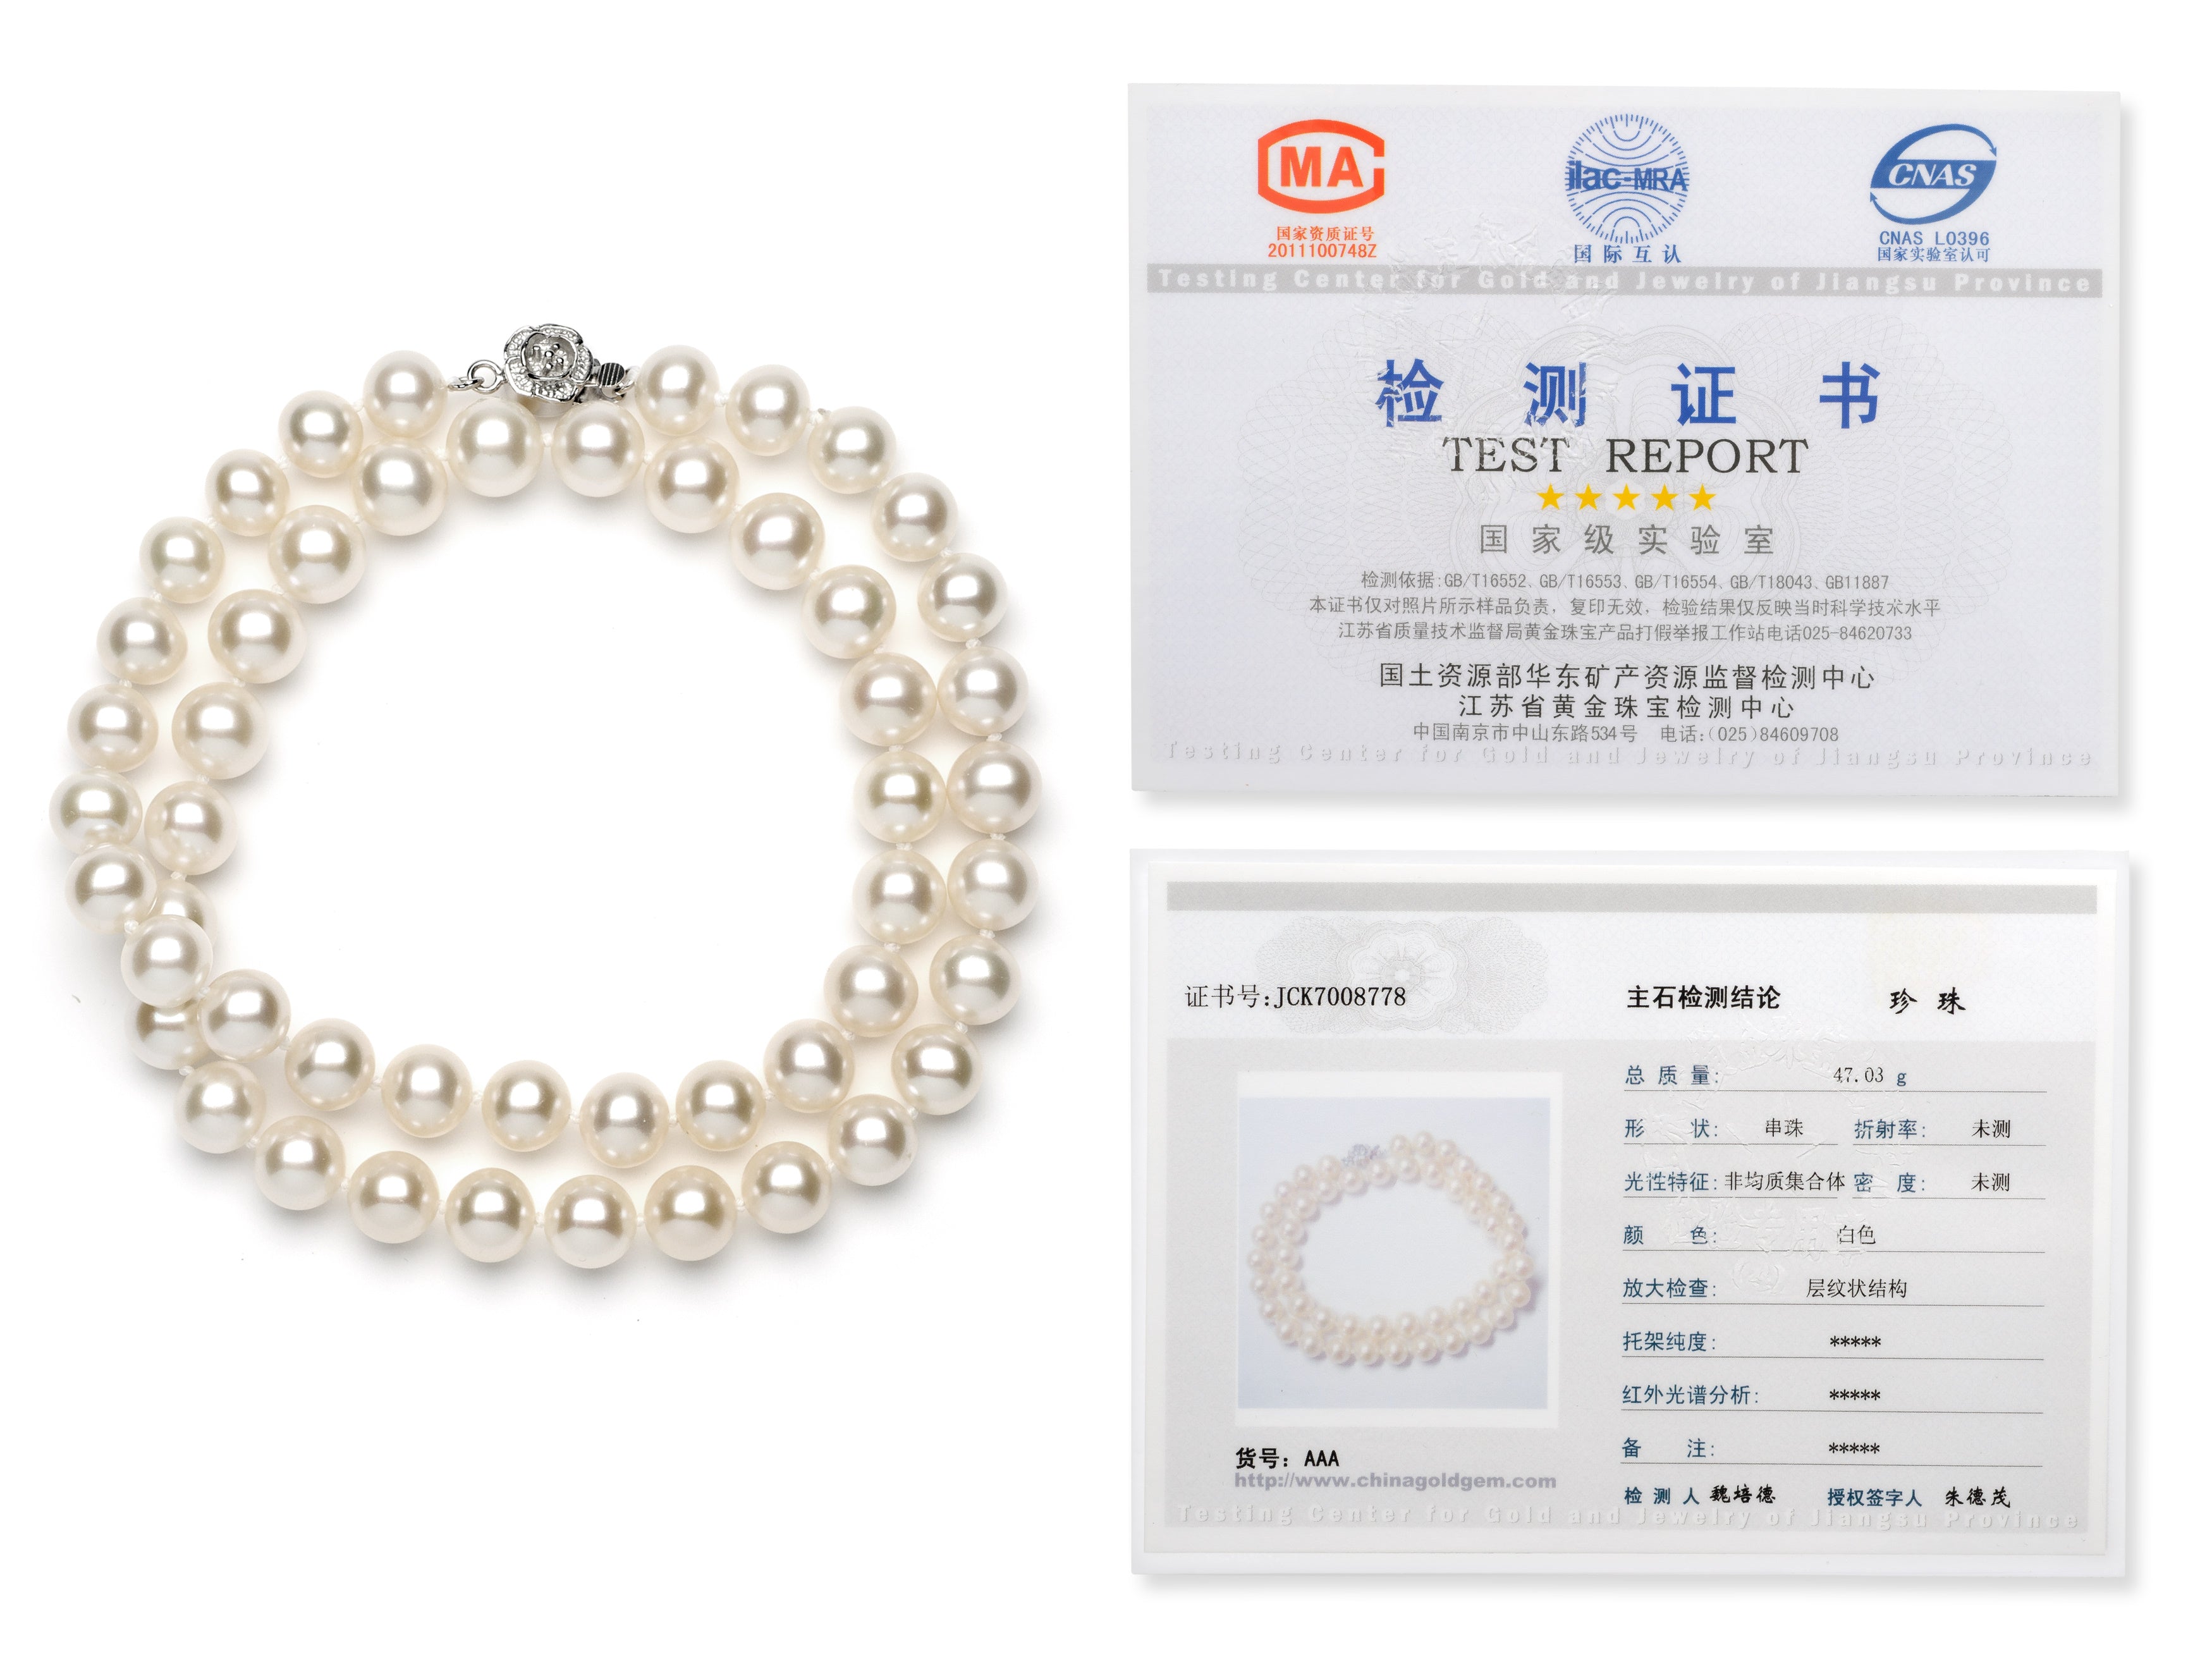 9 mm White Freshwater Pearl Necklace